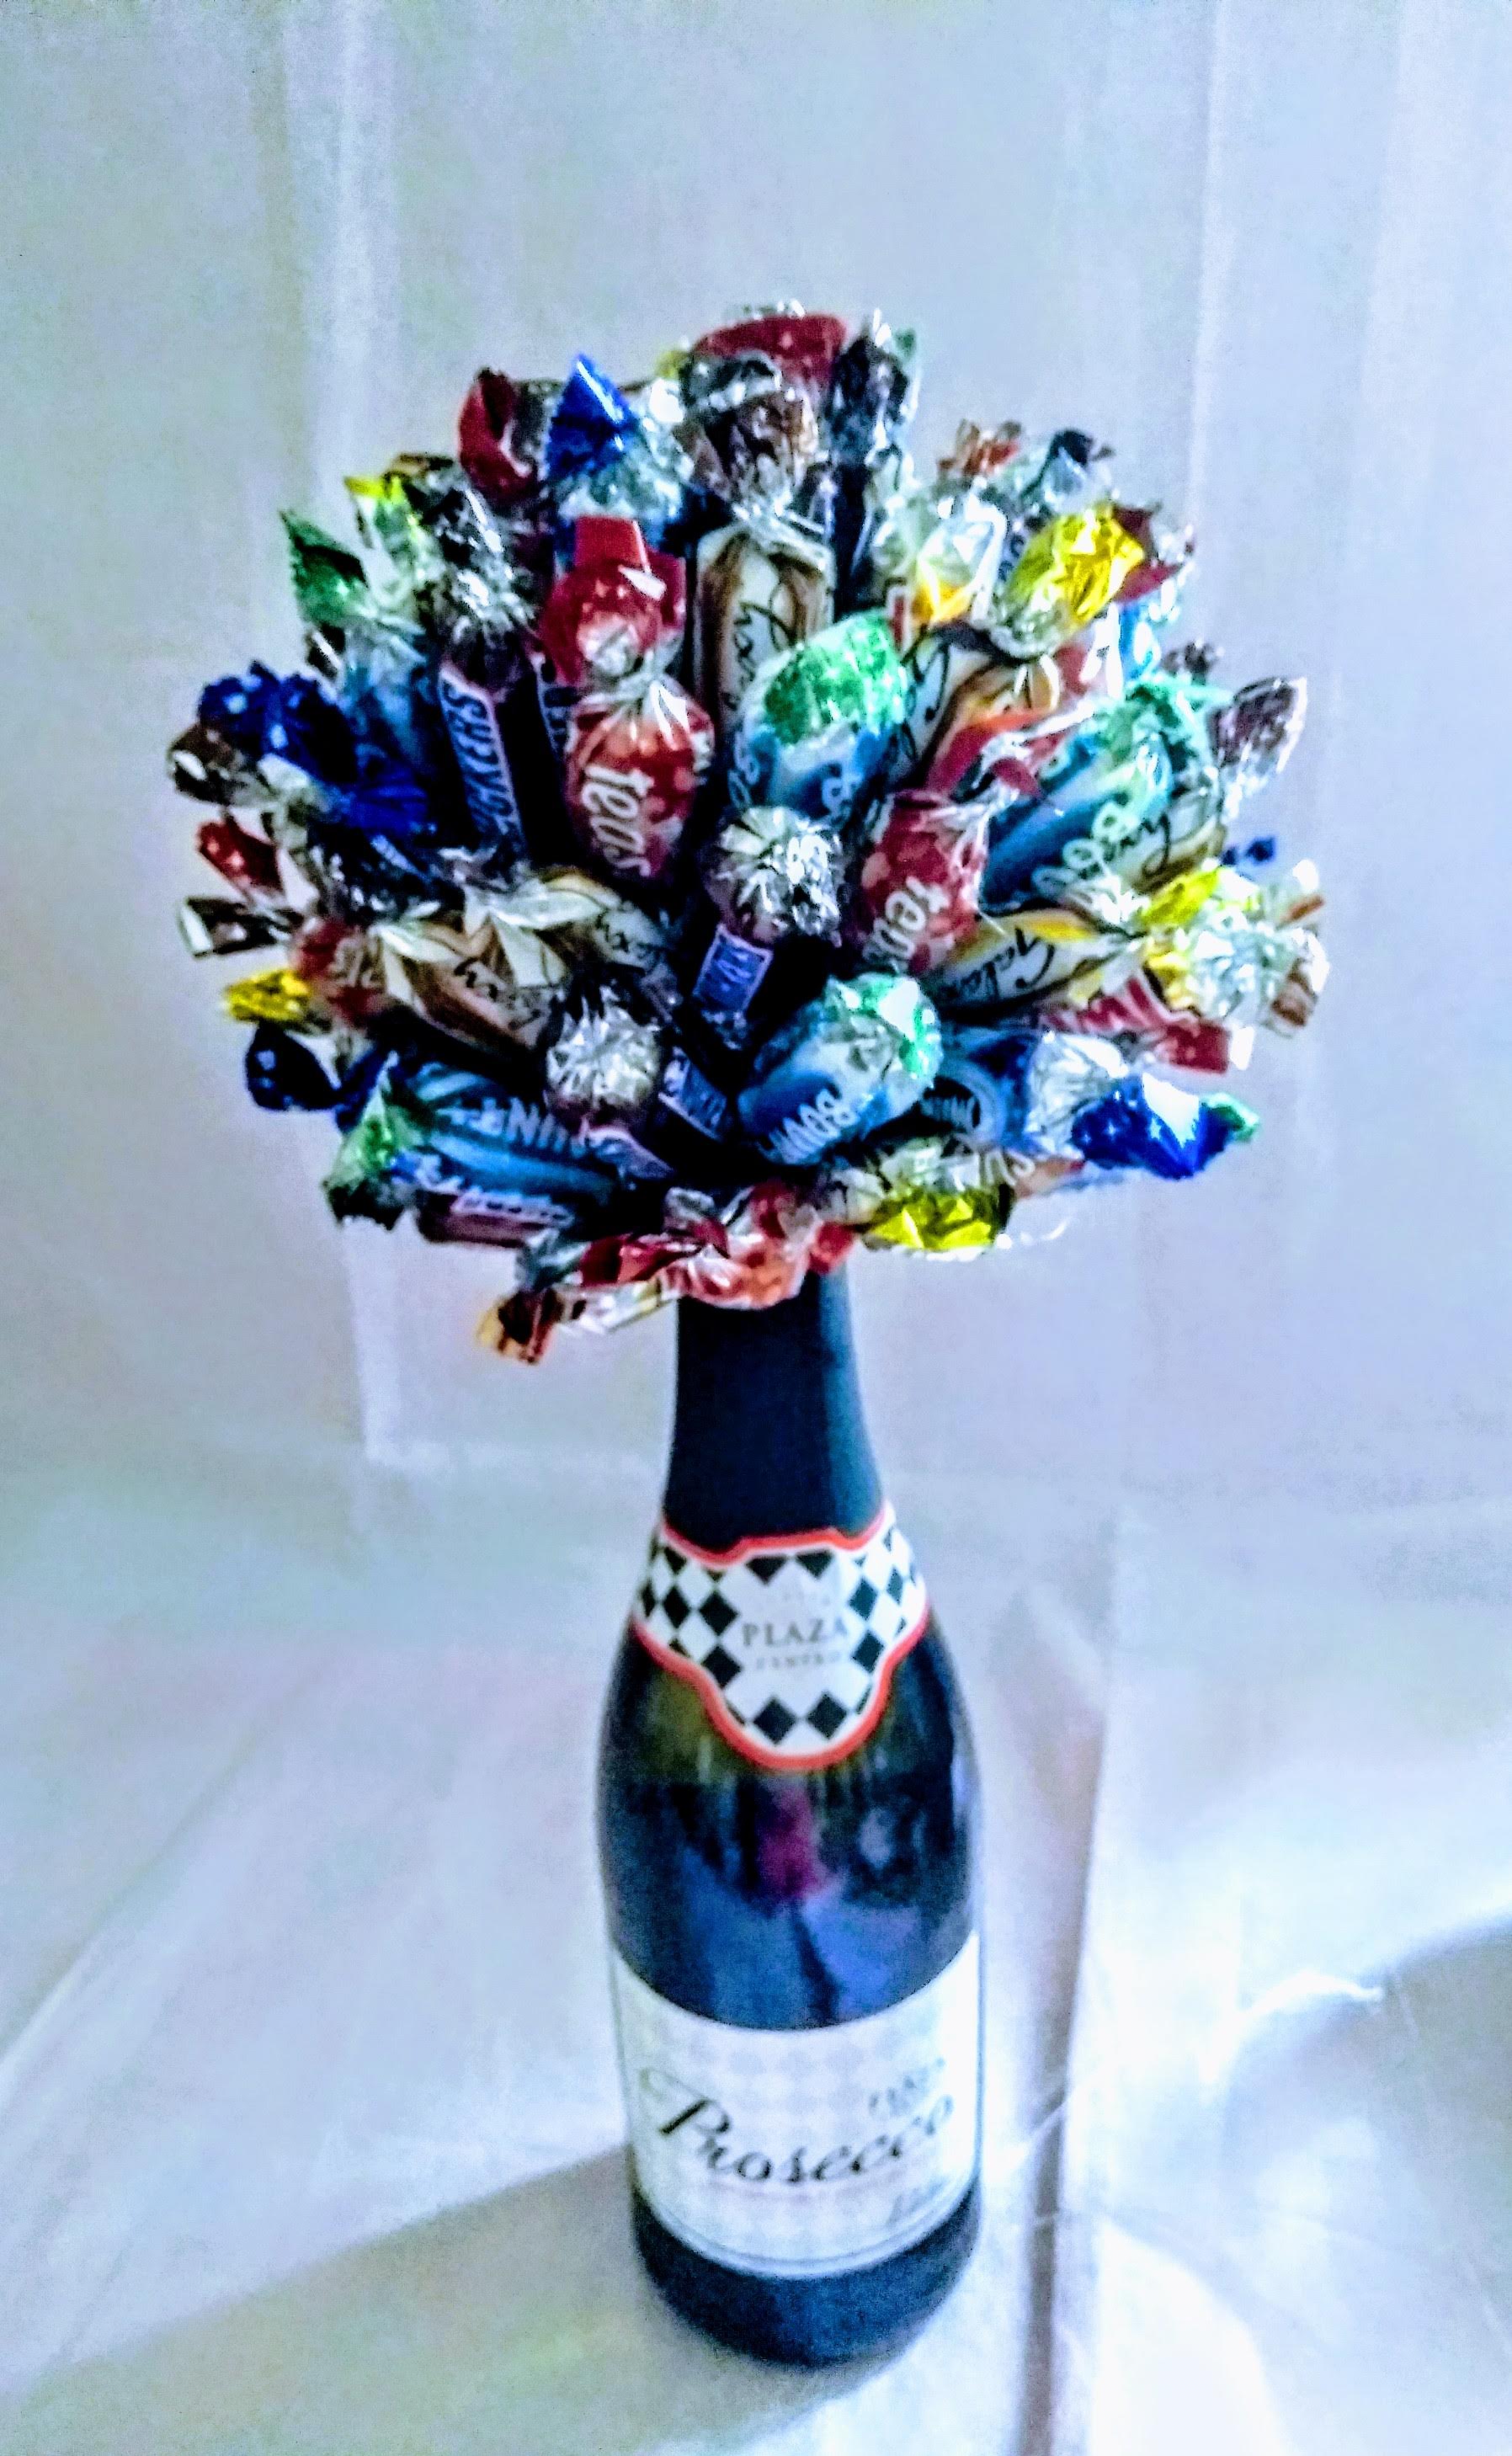 Buy Luxury Prosecco Celebrations Chocolate Bouquets in UK